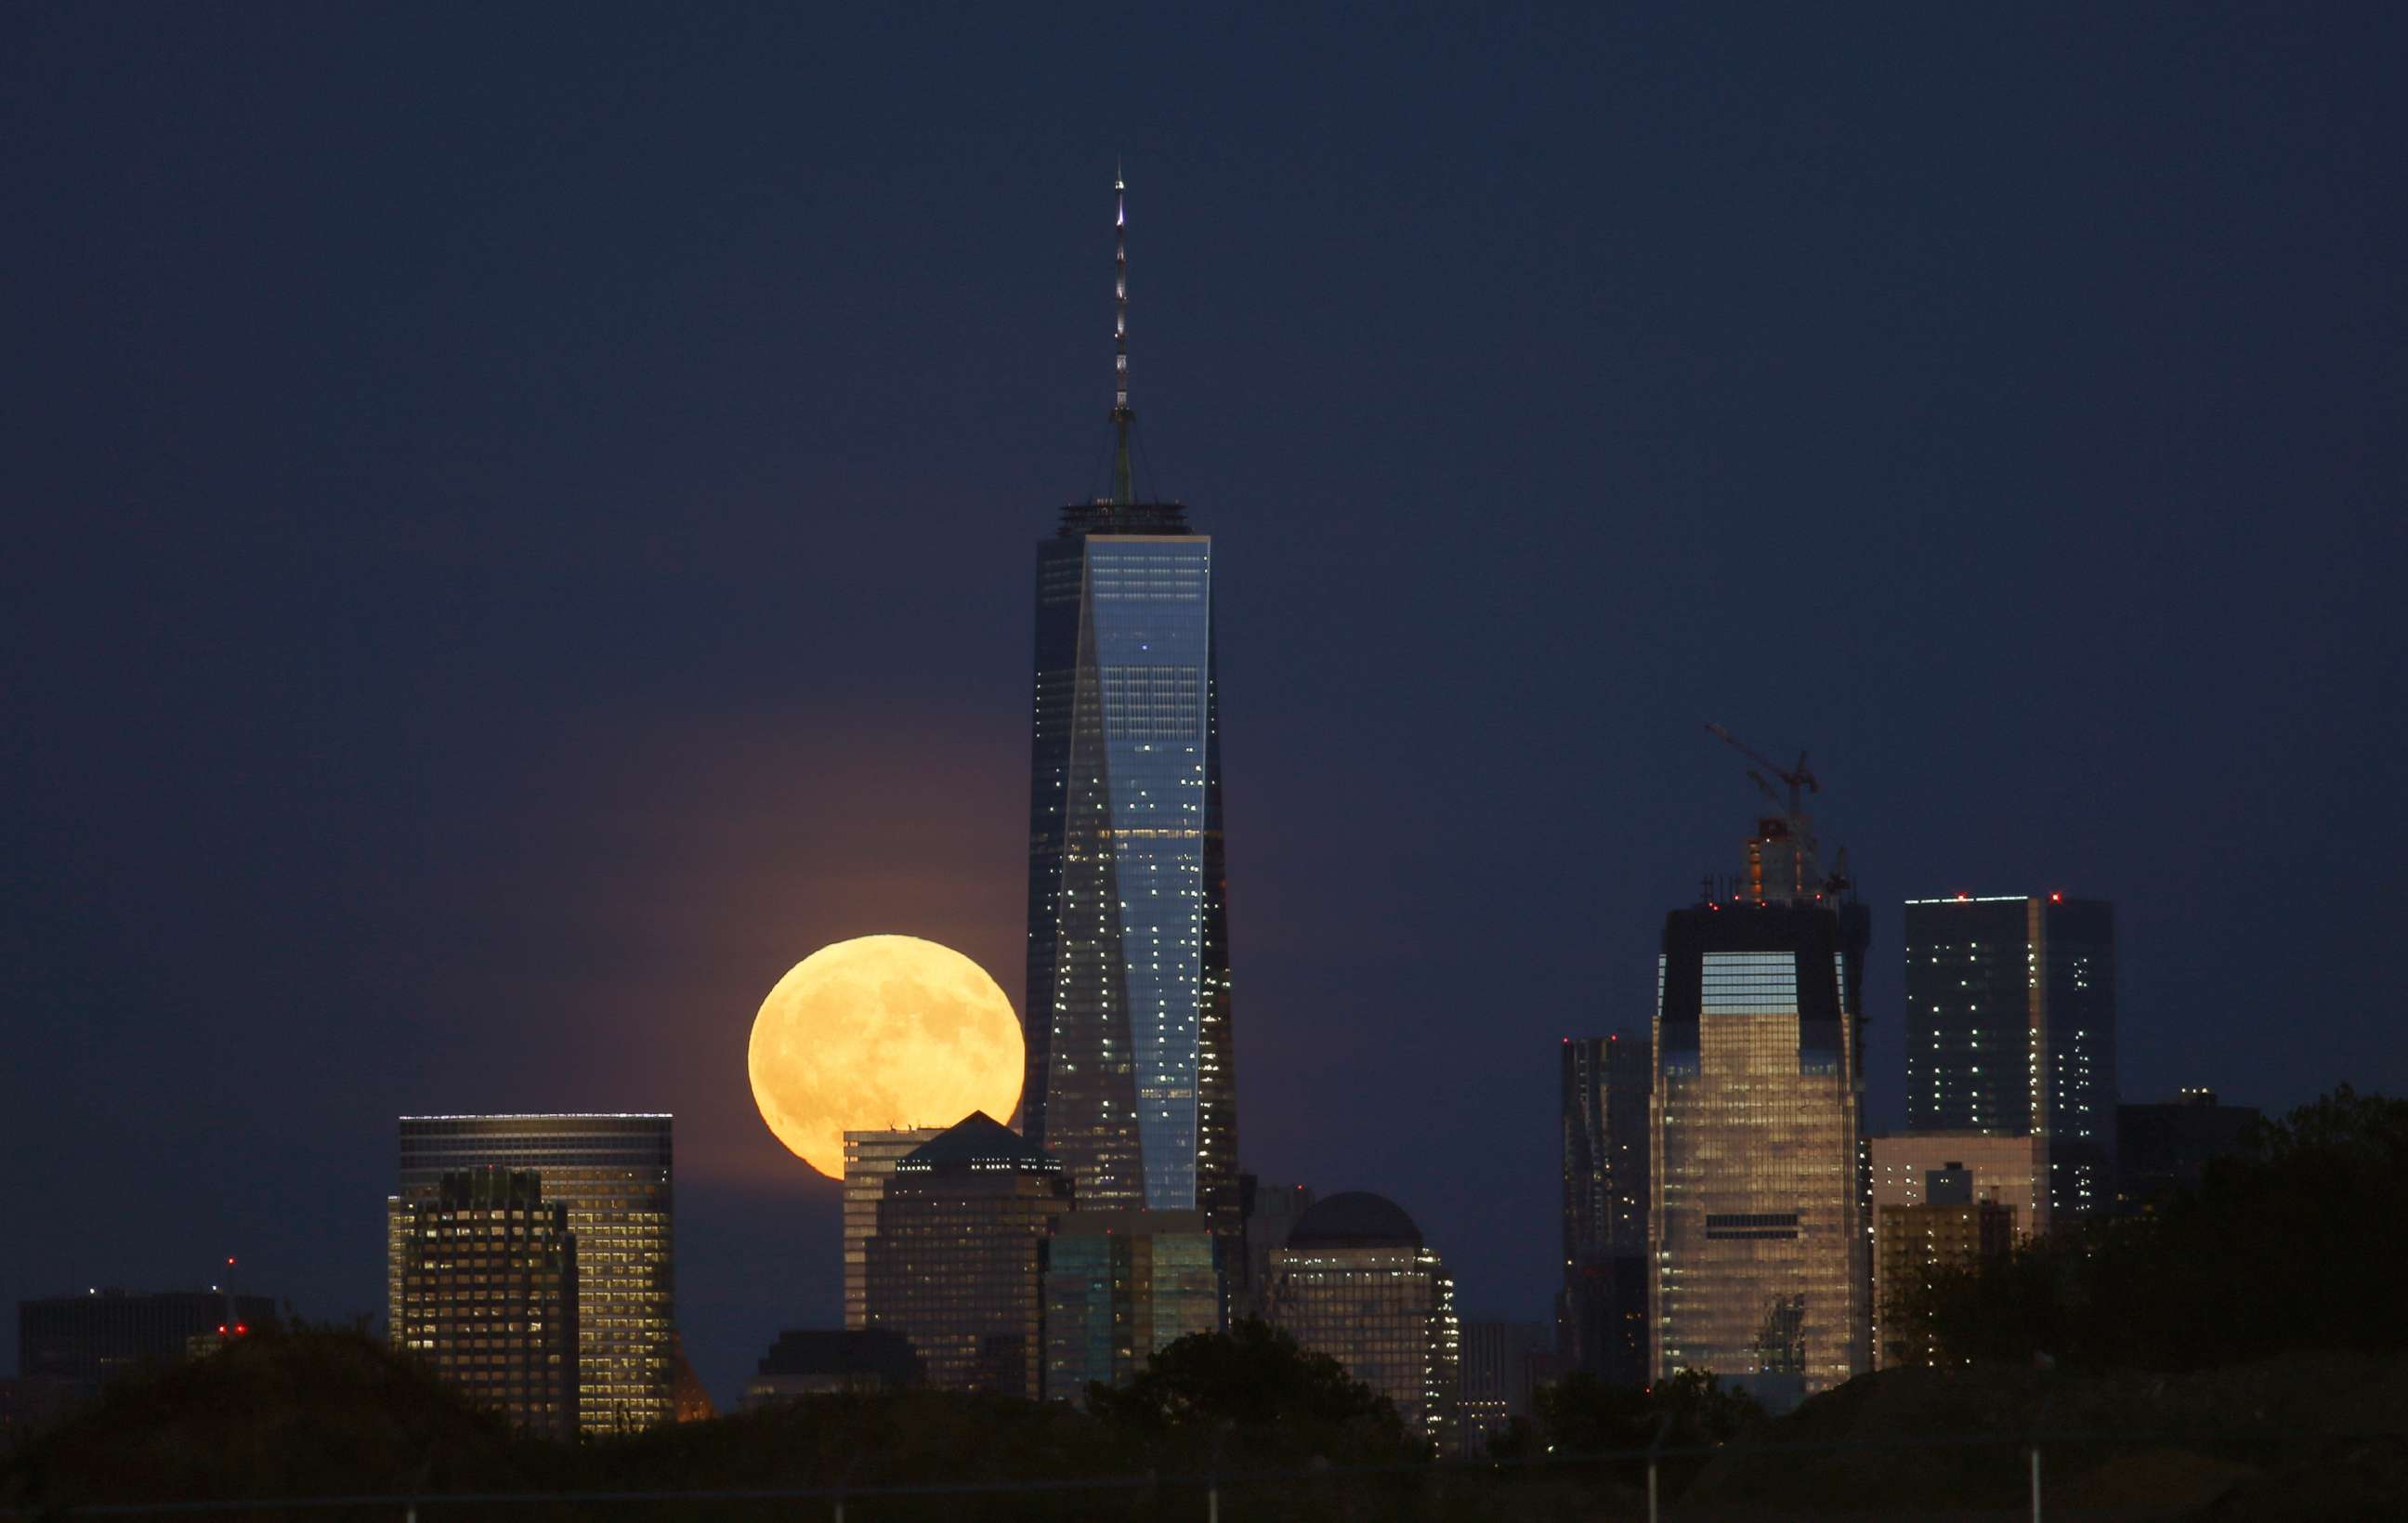 PHOTO: A full harvest moon rises behind Lower Manhattan and One World Trade Center in New York City, Sept. 16, 2016 as seen from Newark, N.J. 